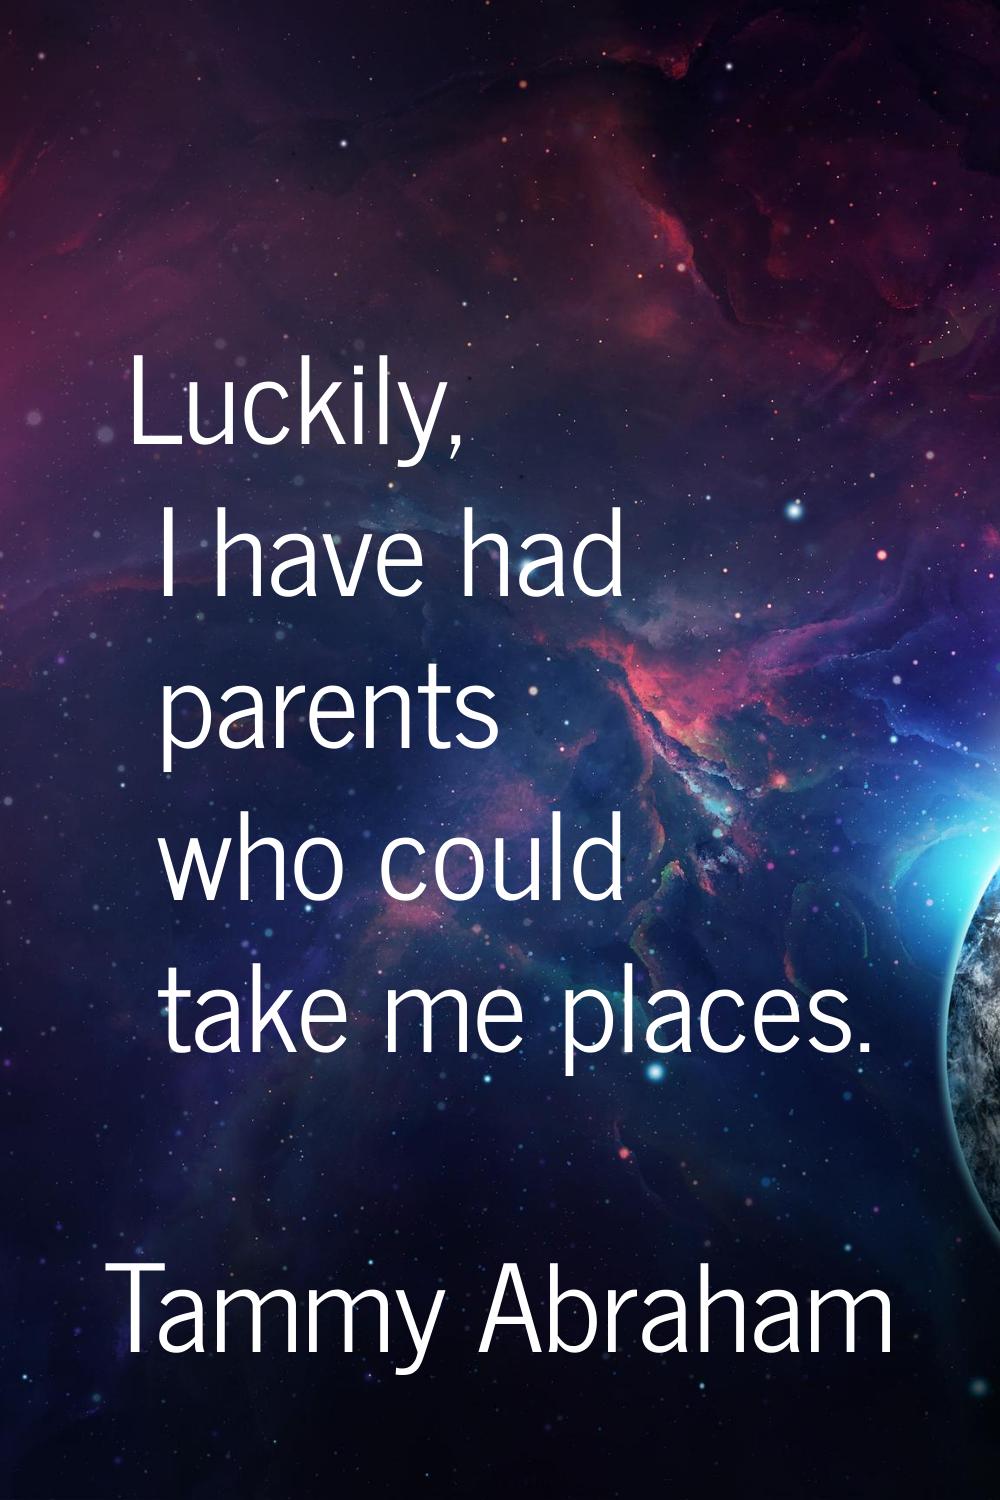 Luckily, I have had parents who could take me places.